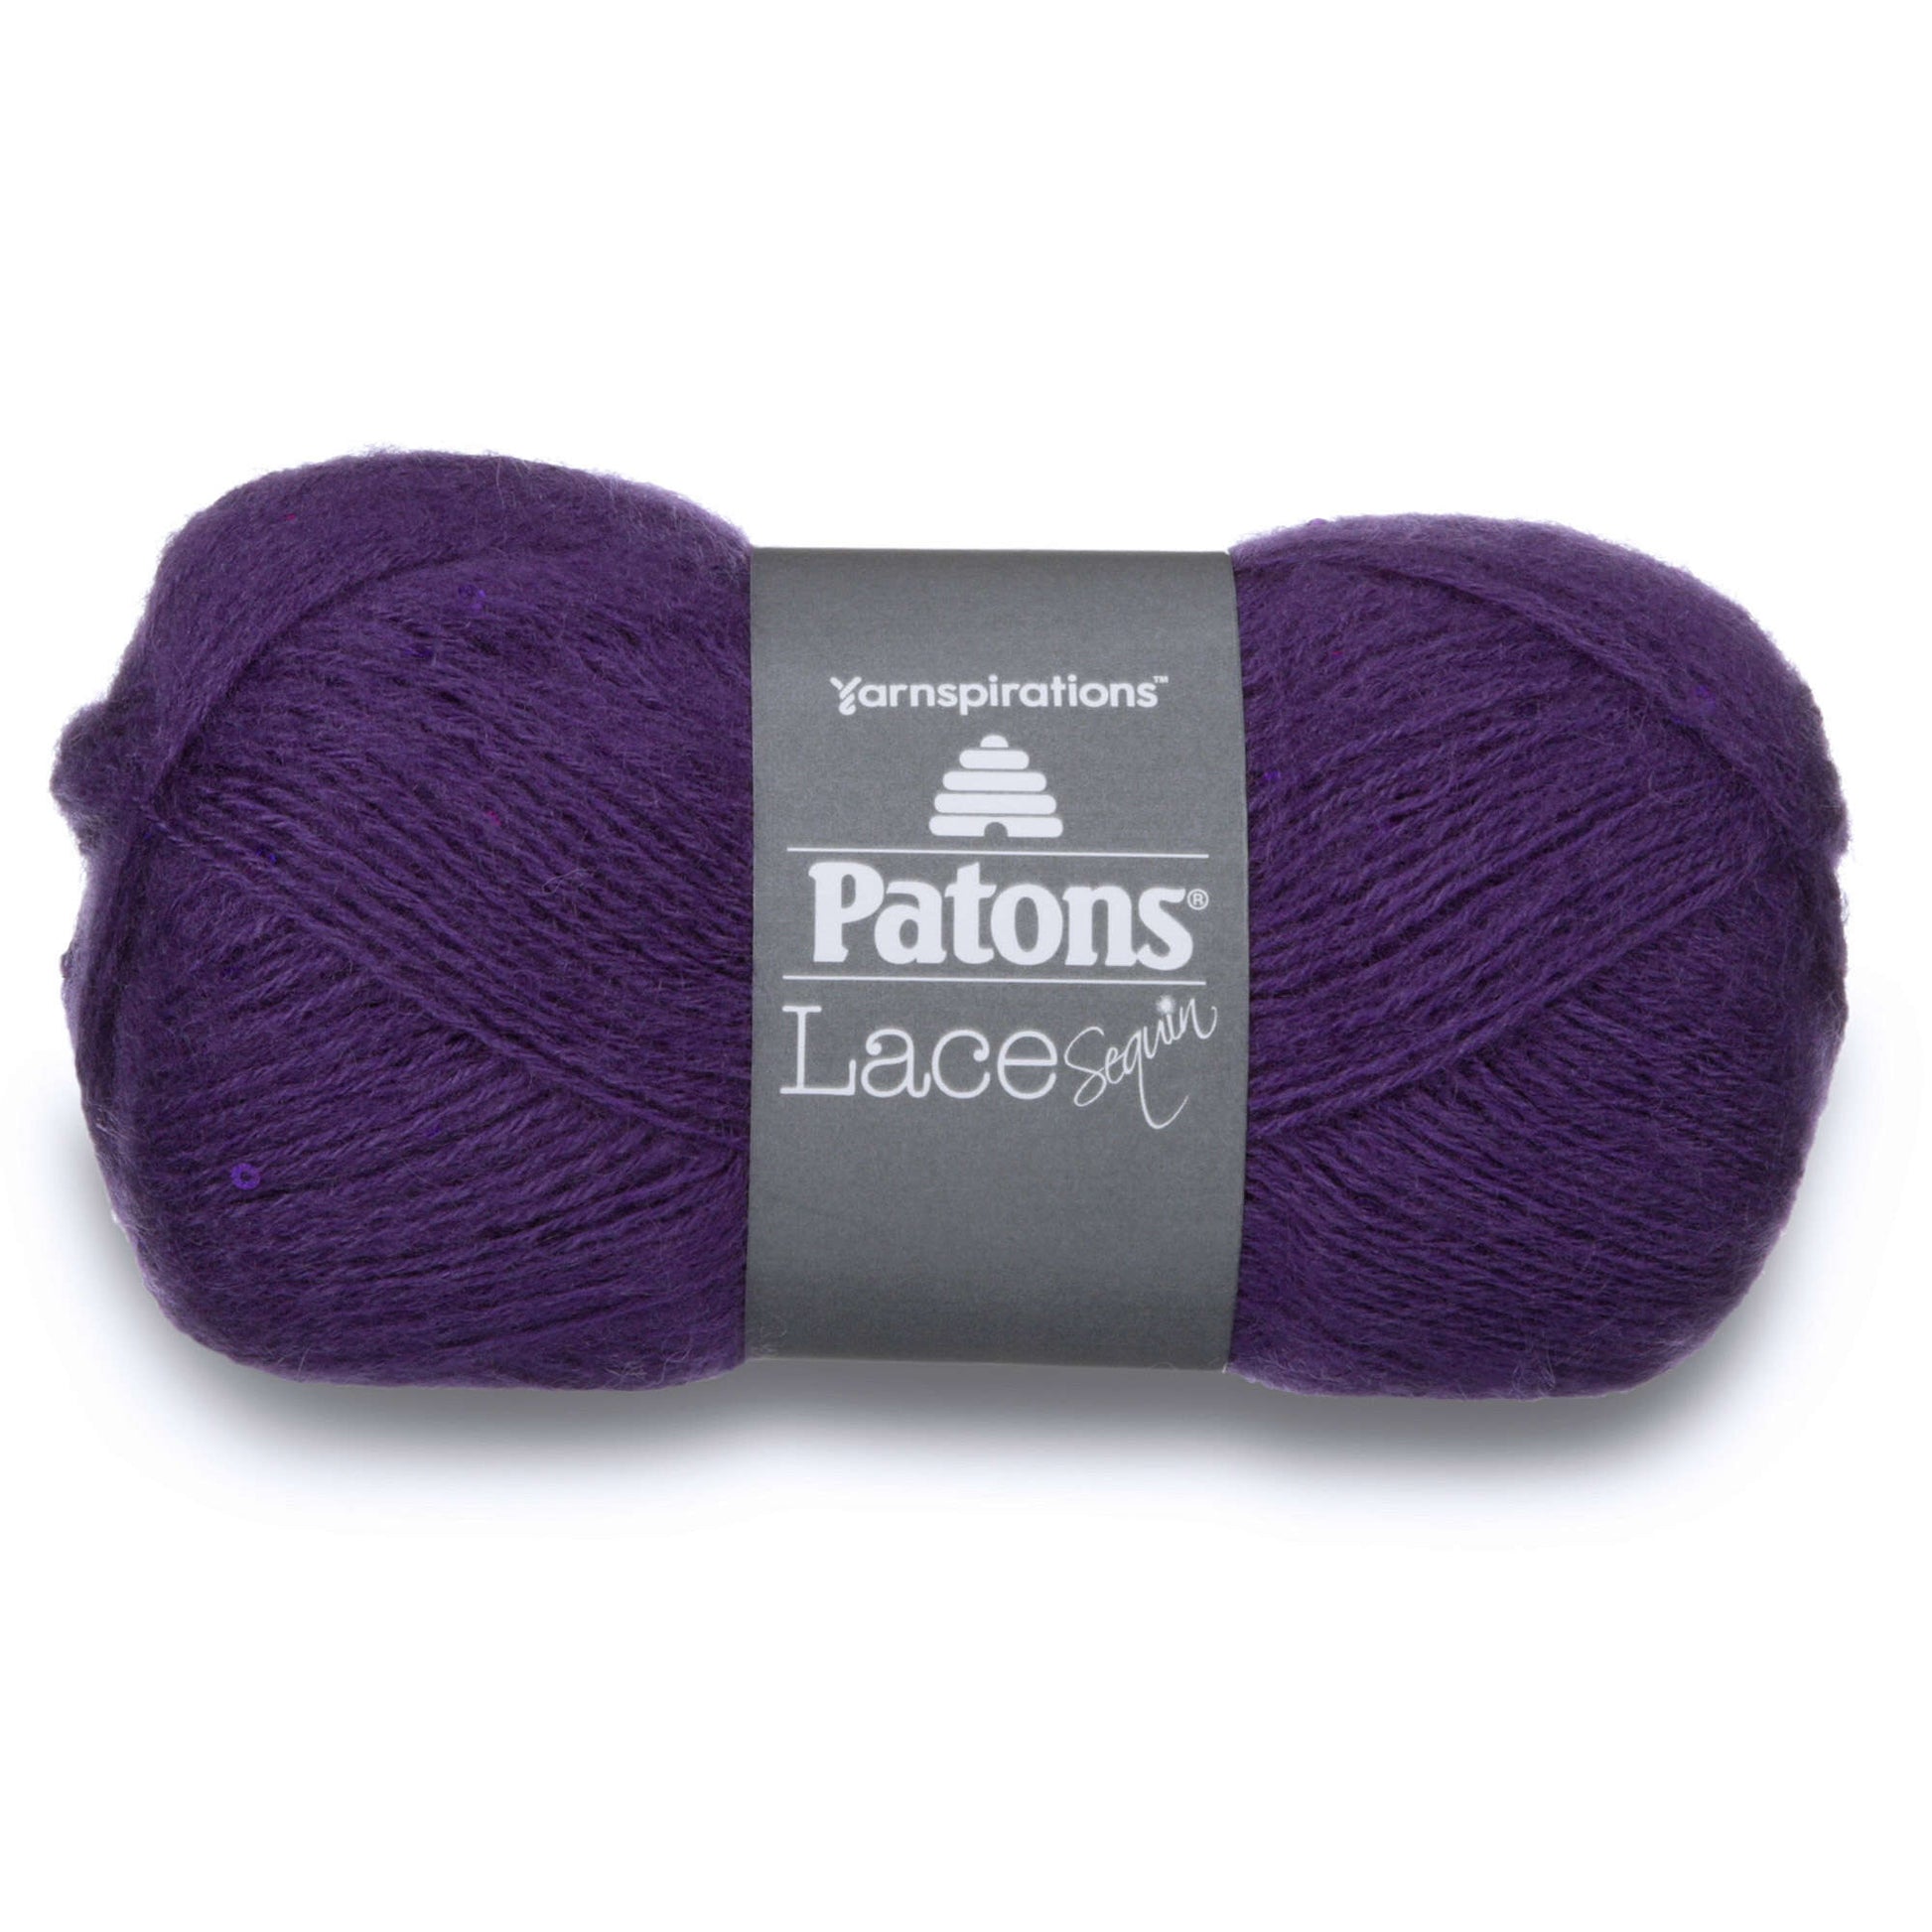 Patons Lace Sequin Yarn - Discontinued Amethyst